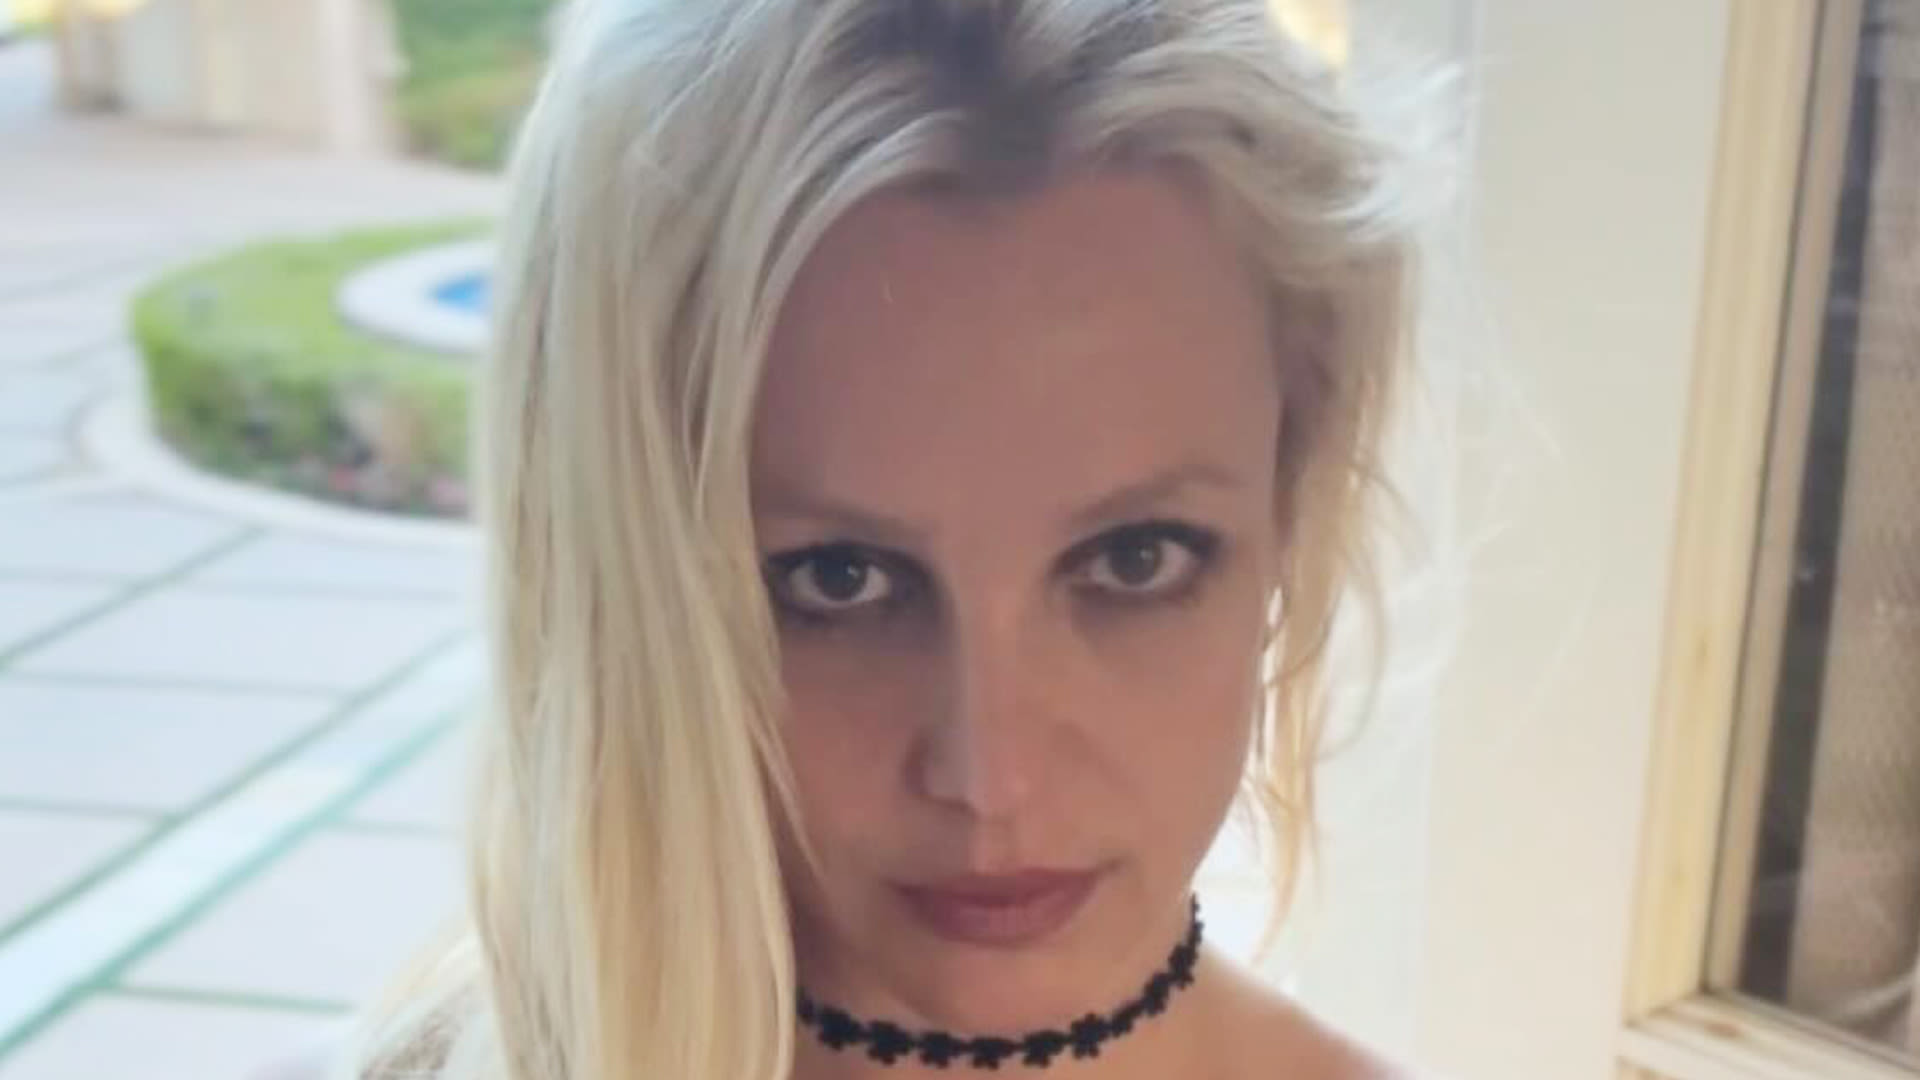 Britney Spears shows foot injury after ‘fight’ with boyfriend but blames her mom